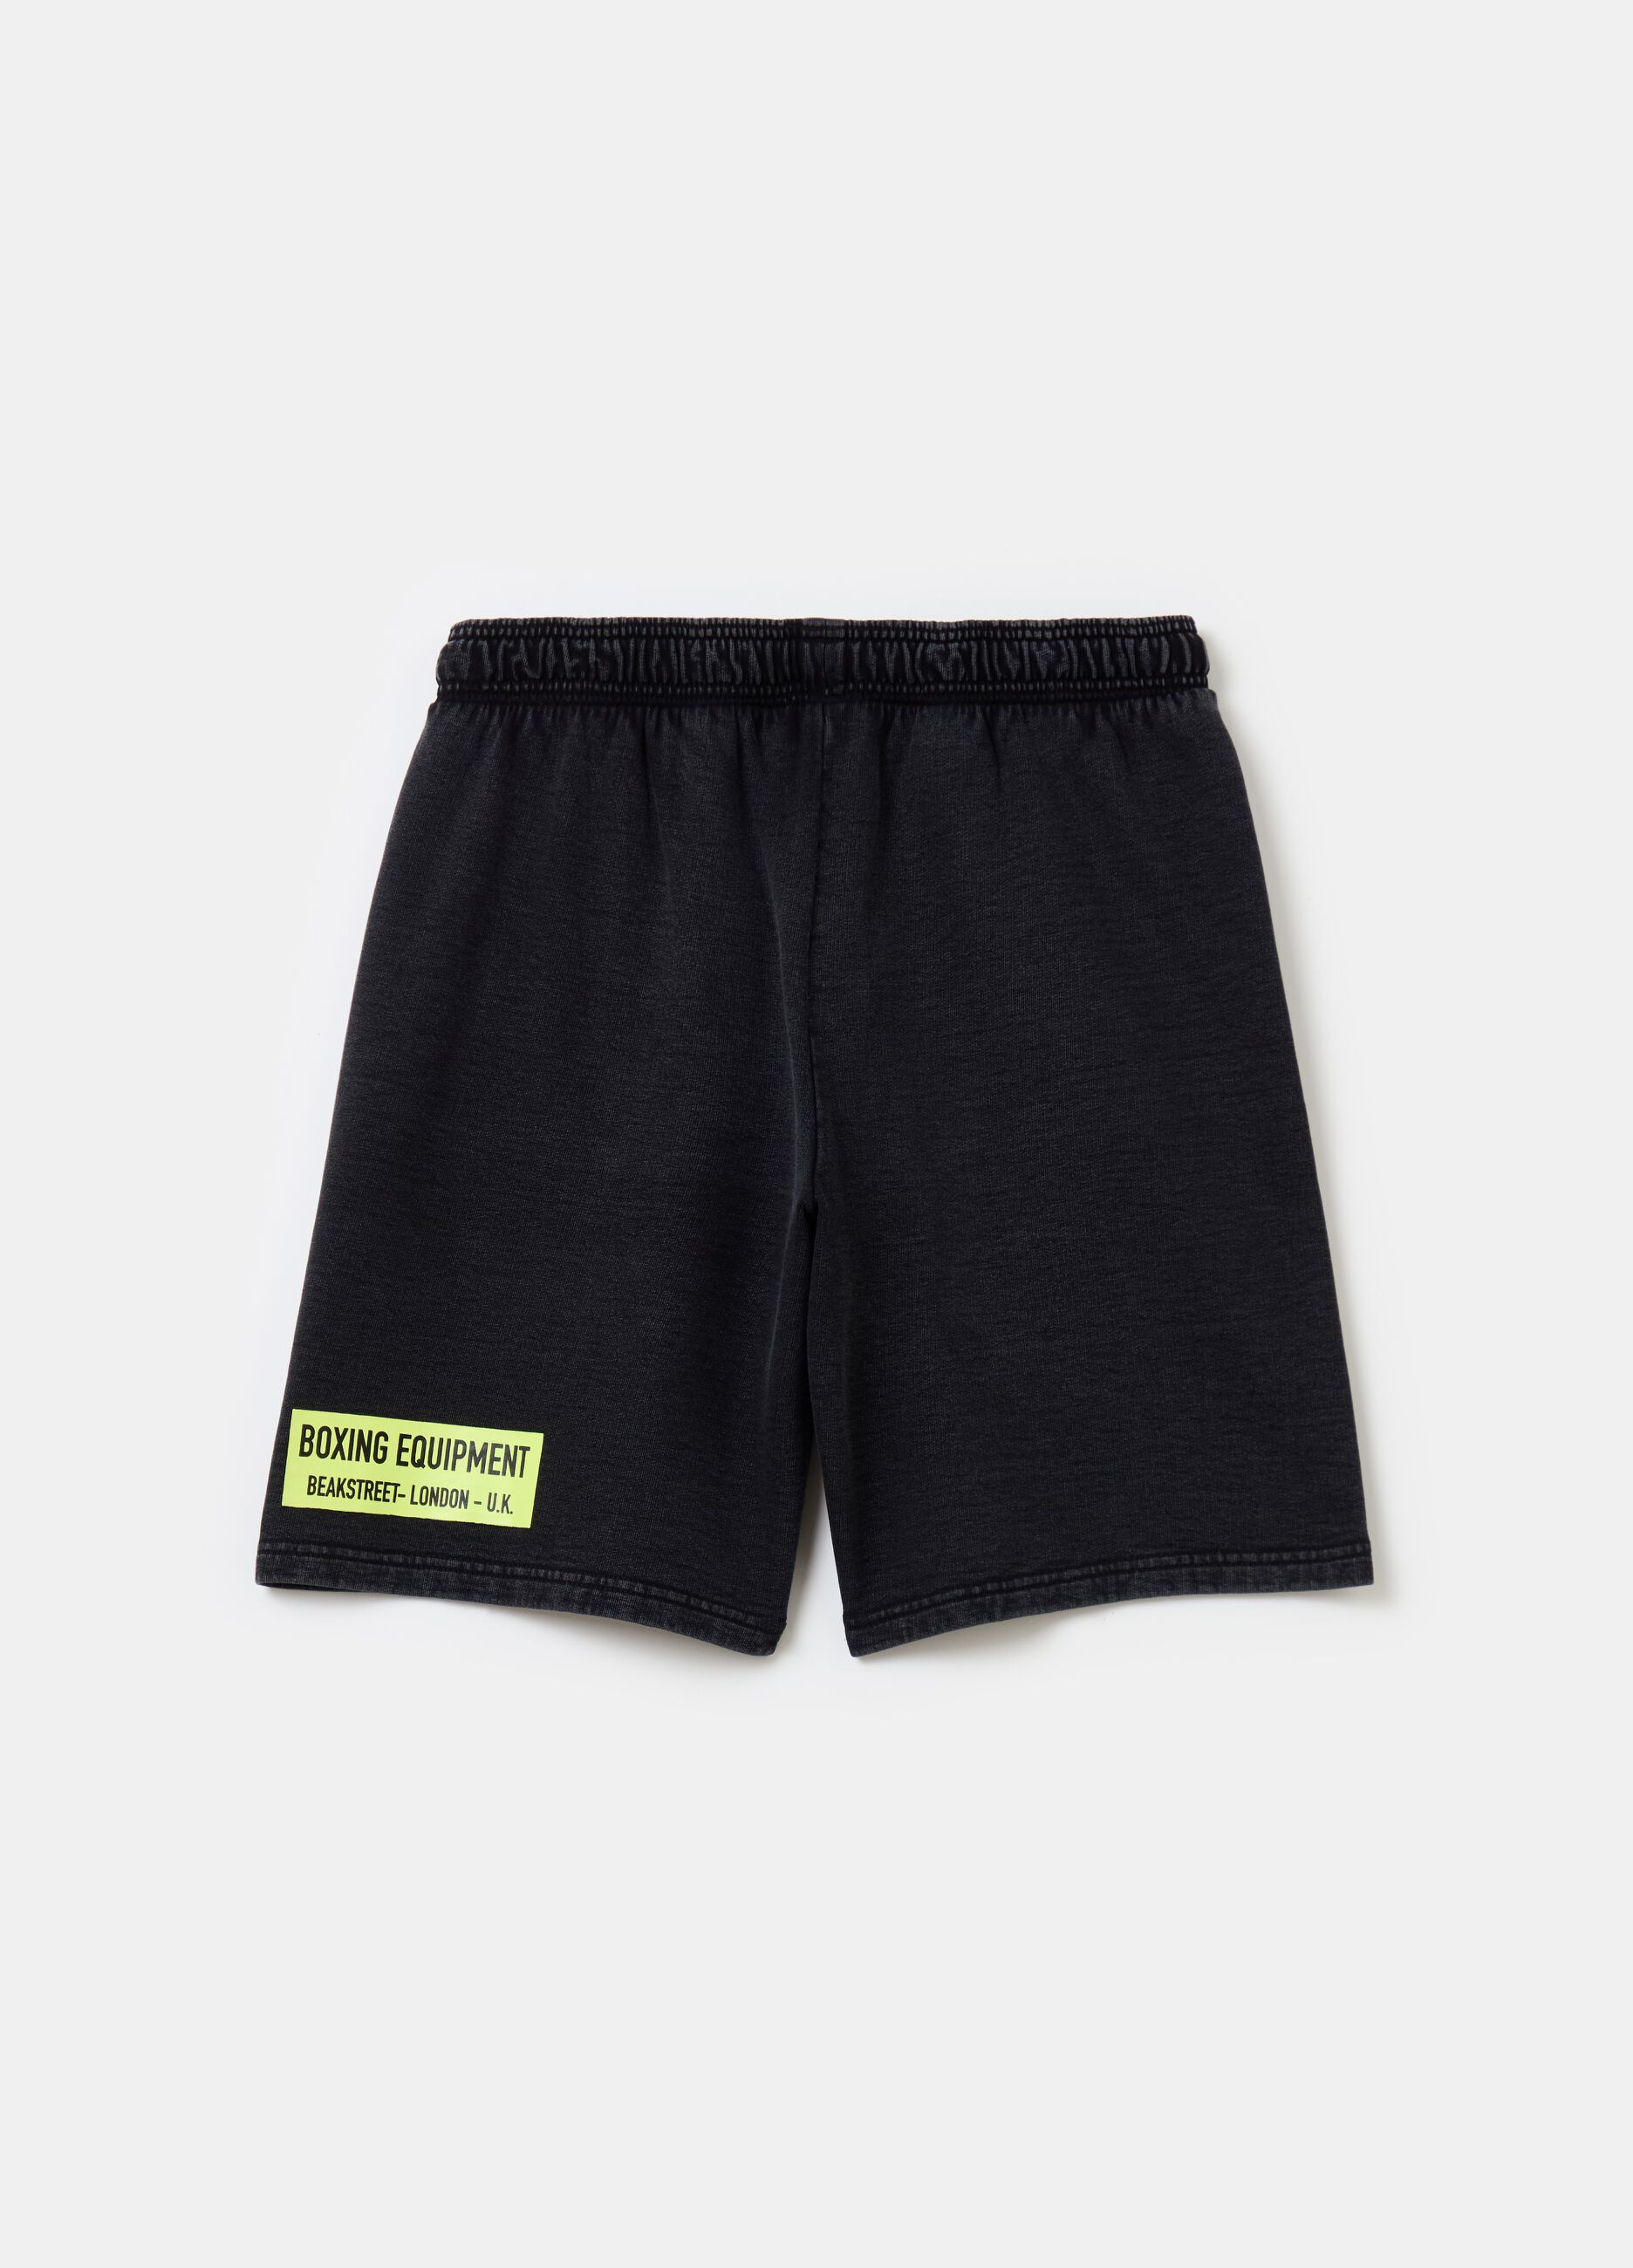 Bermuda shorts with logo embroidery and Boxing print